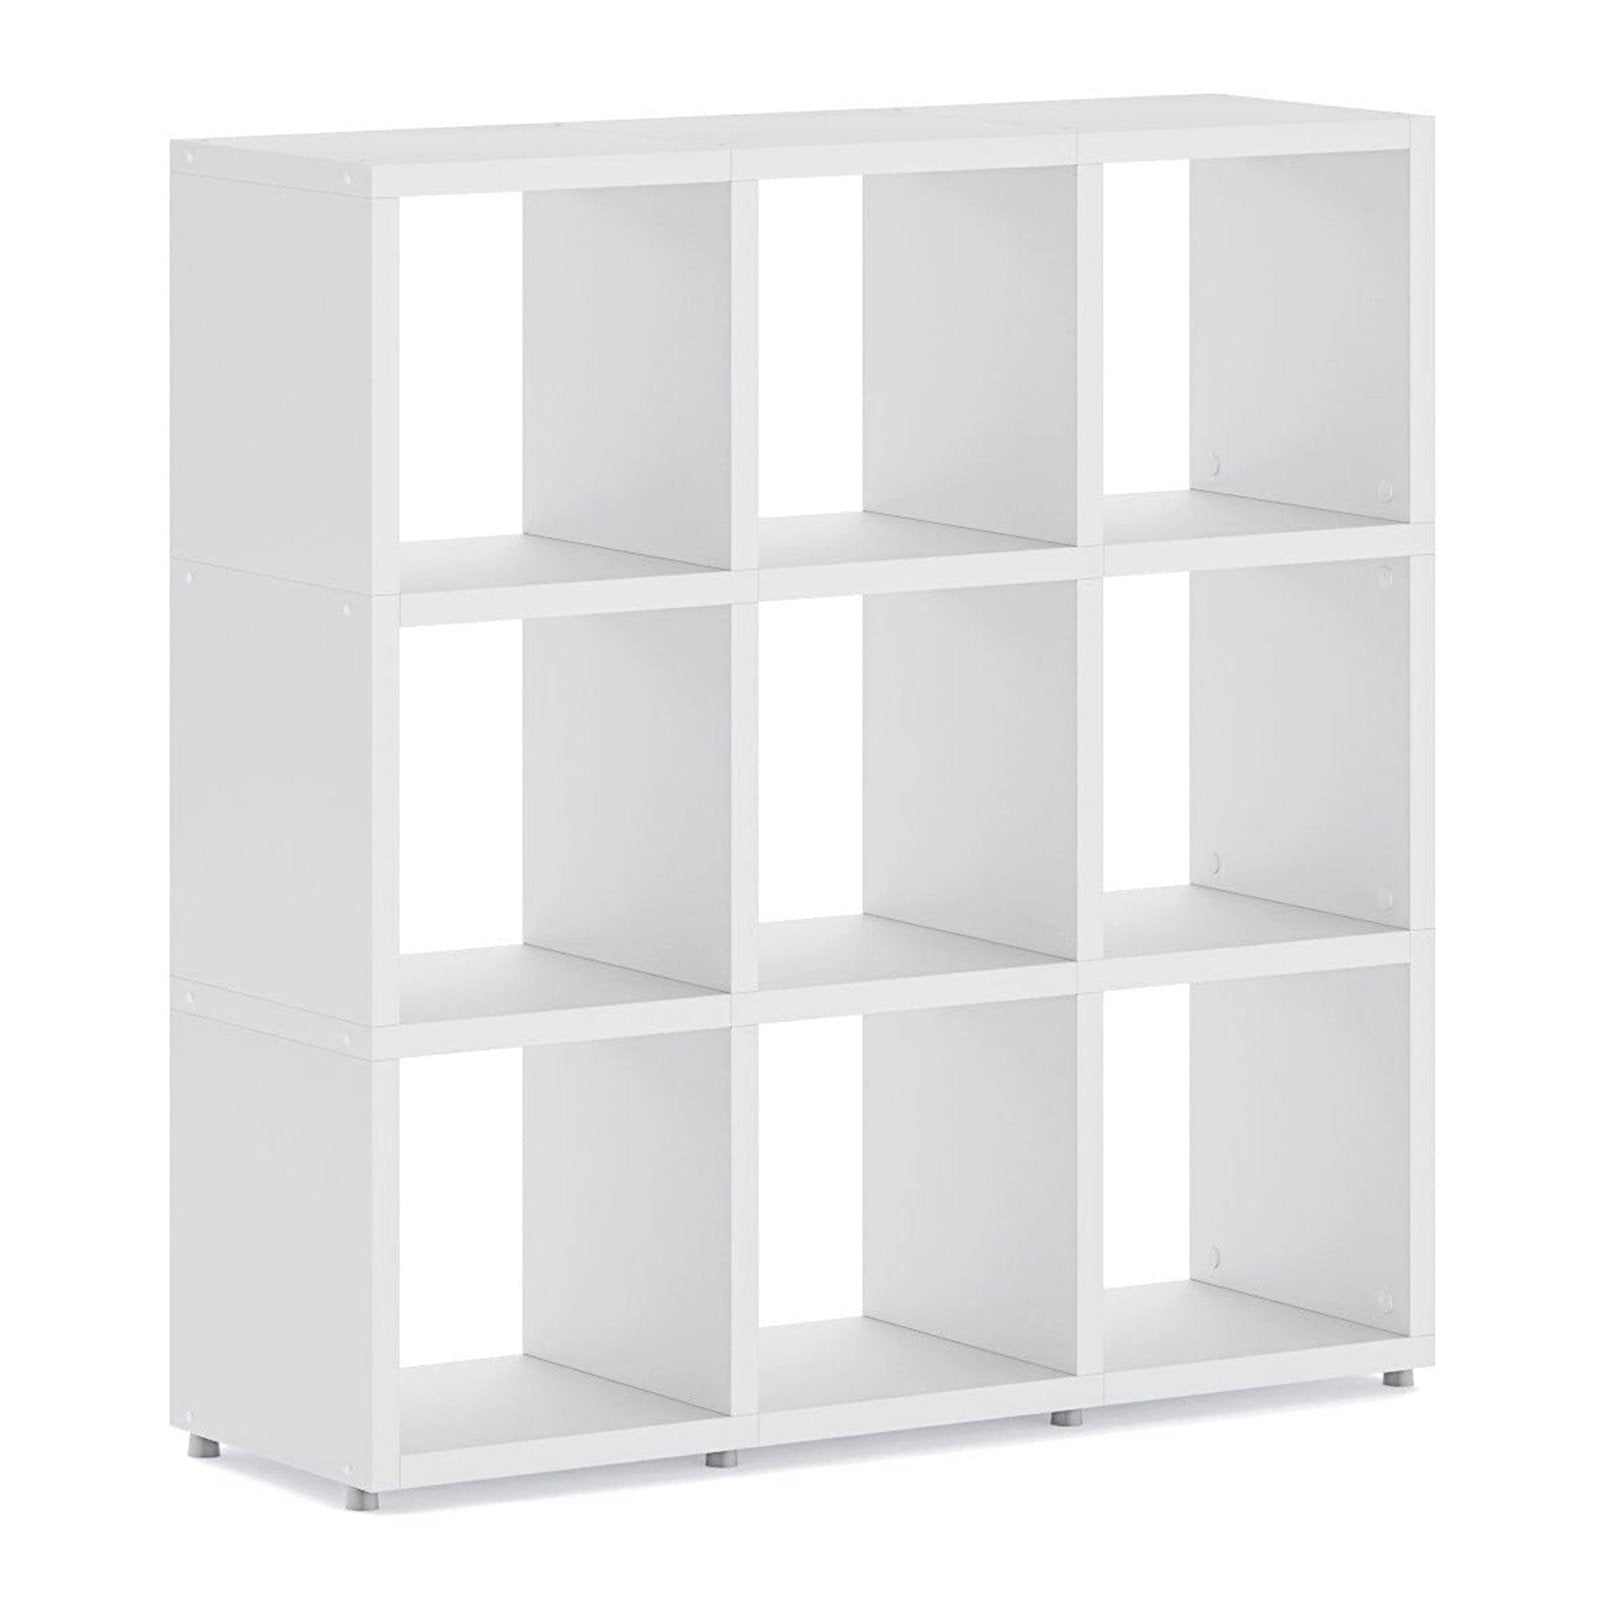 Boon 9x Cube Shelf Storage System - 1120x1100x330mm - Office Products Online